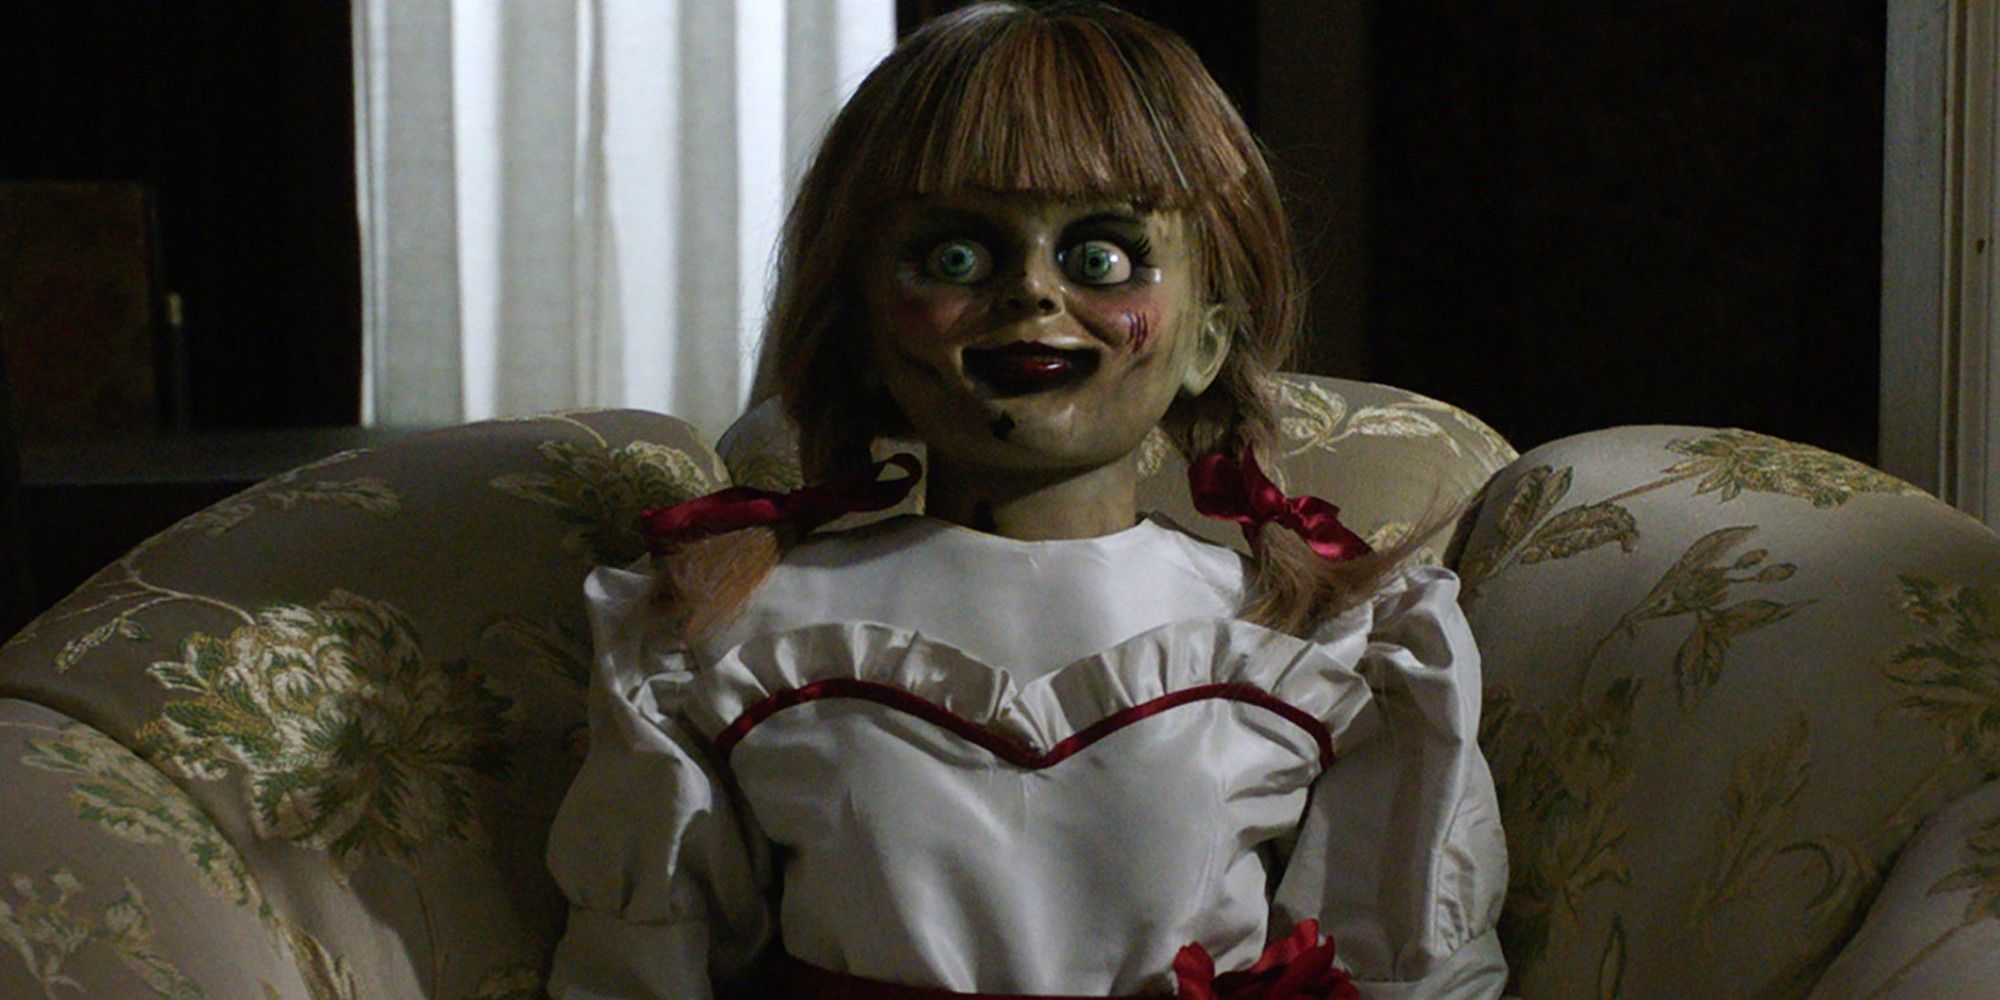 The Conjuring’s Annabelle Movies Are The Only Spin-Offs That Make Sense